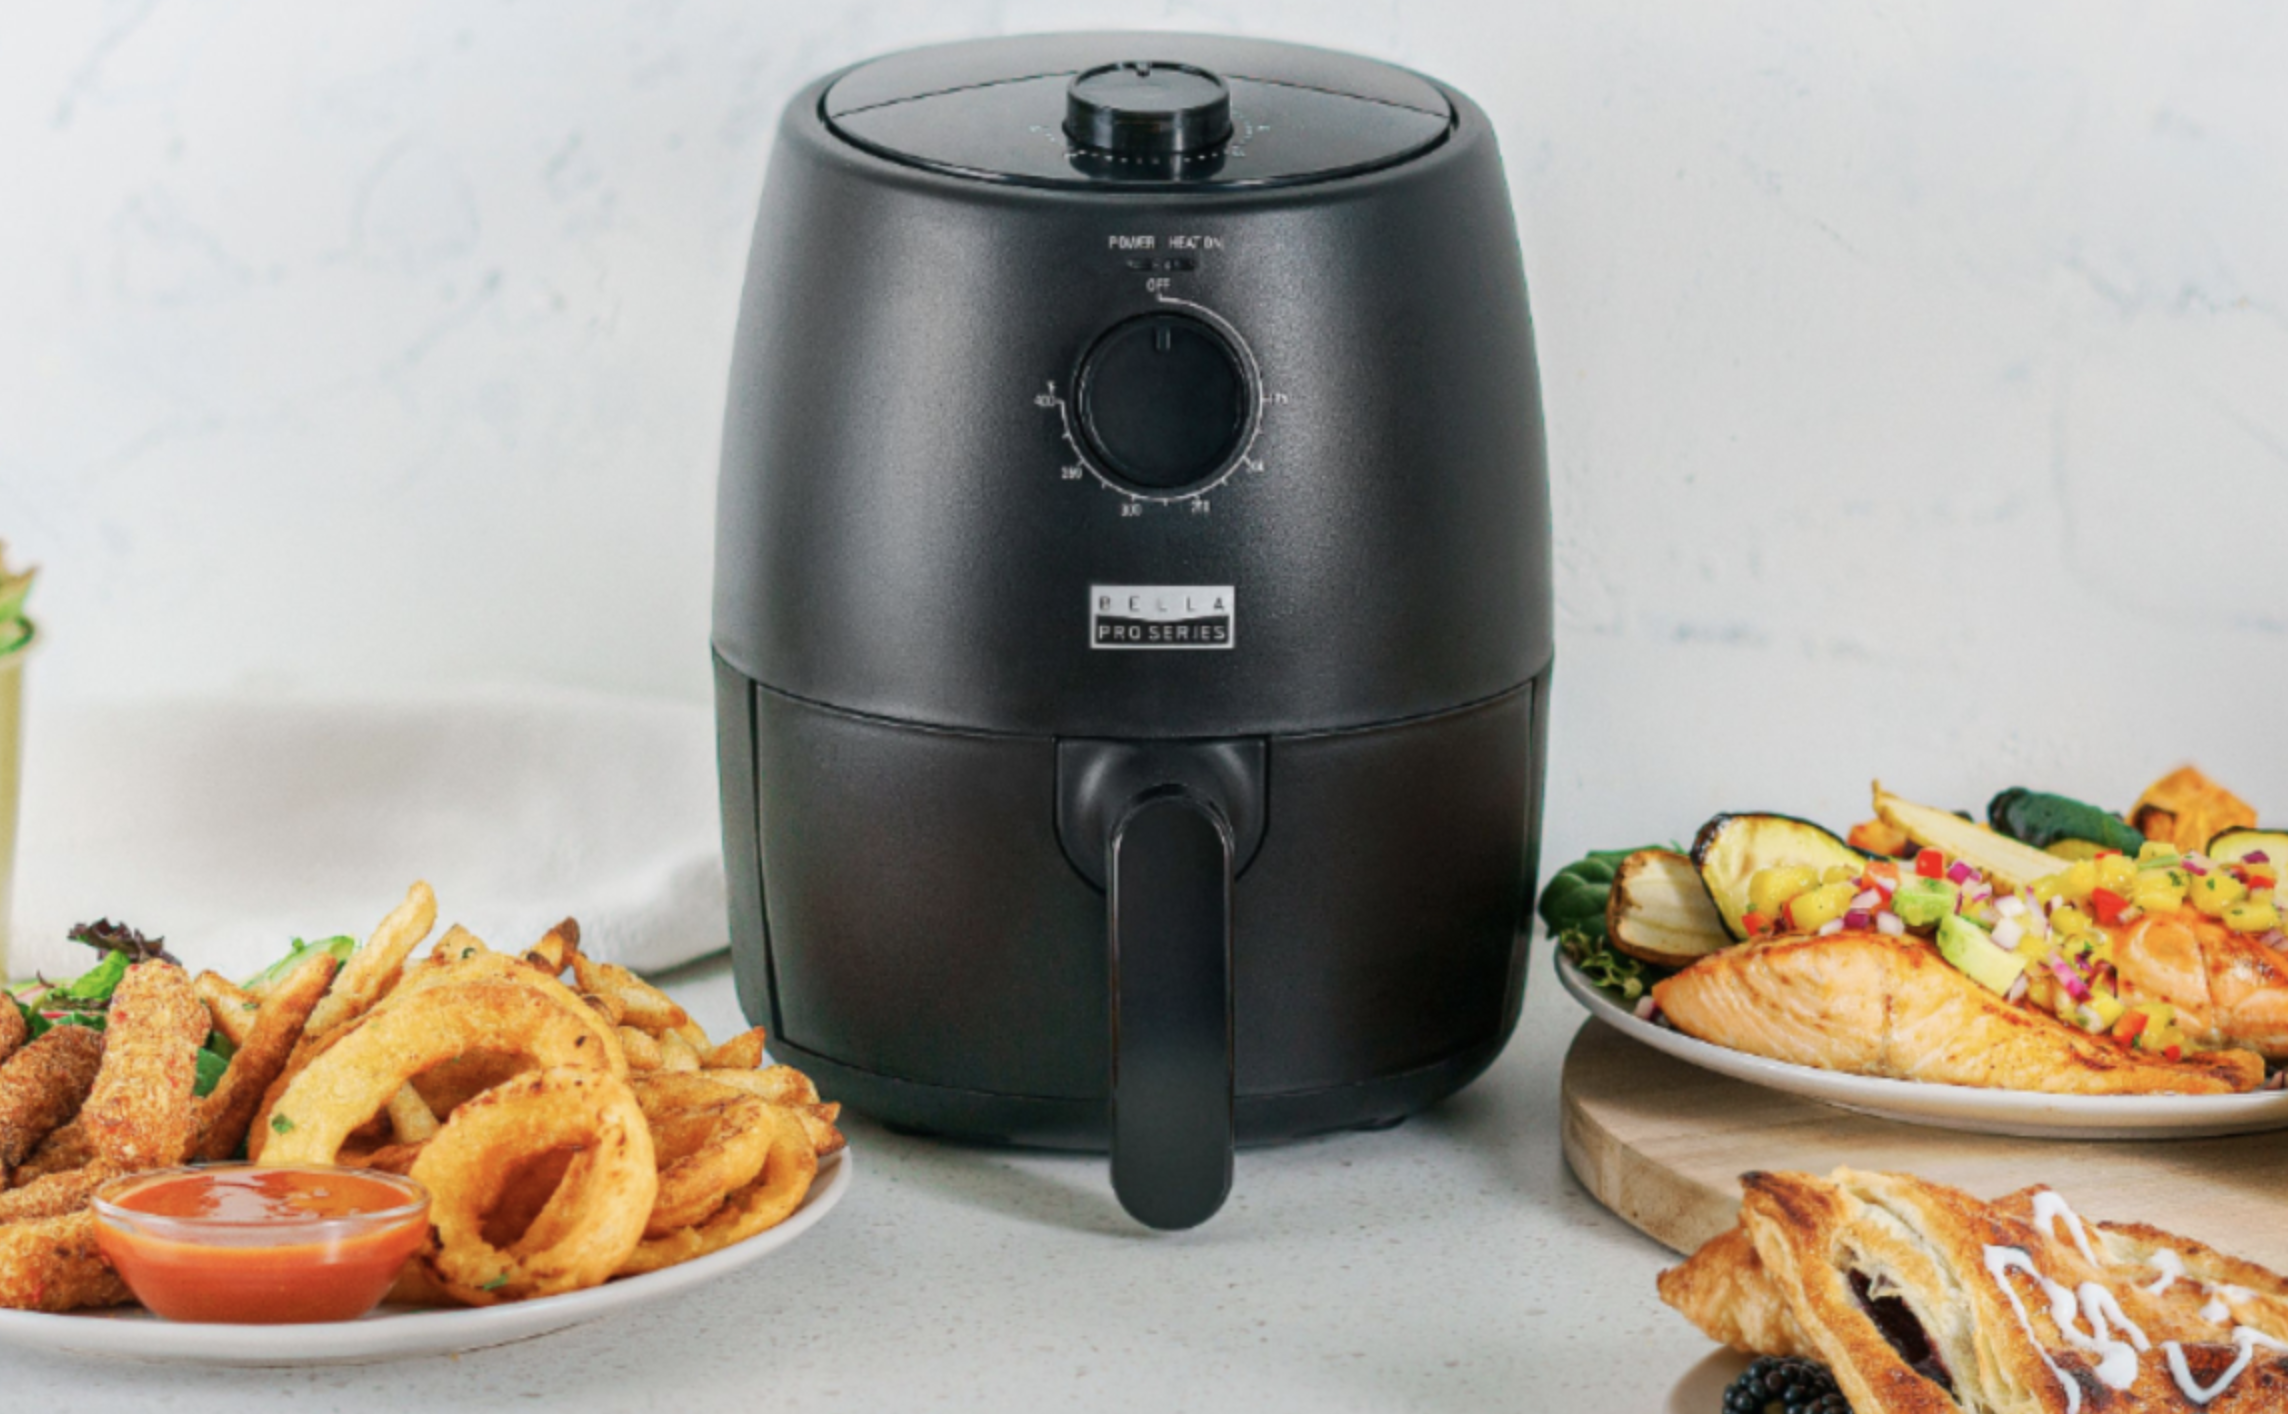 Ends soon: Get this cupboard-sized Air Fryer for $18 today